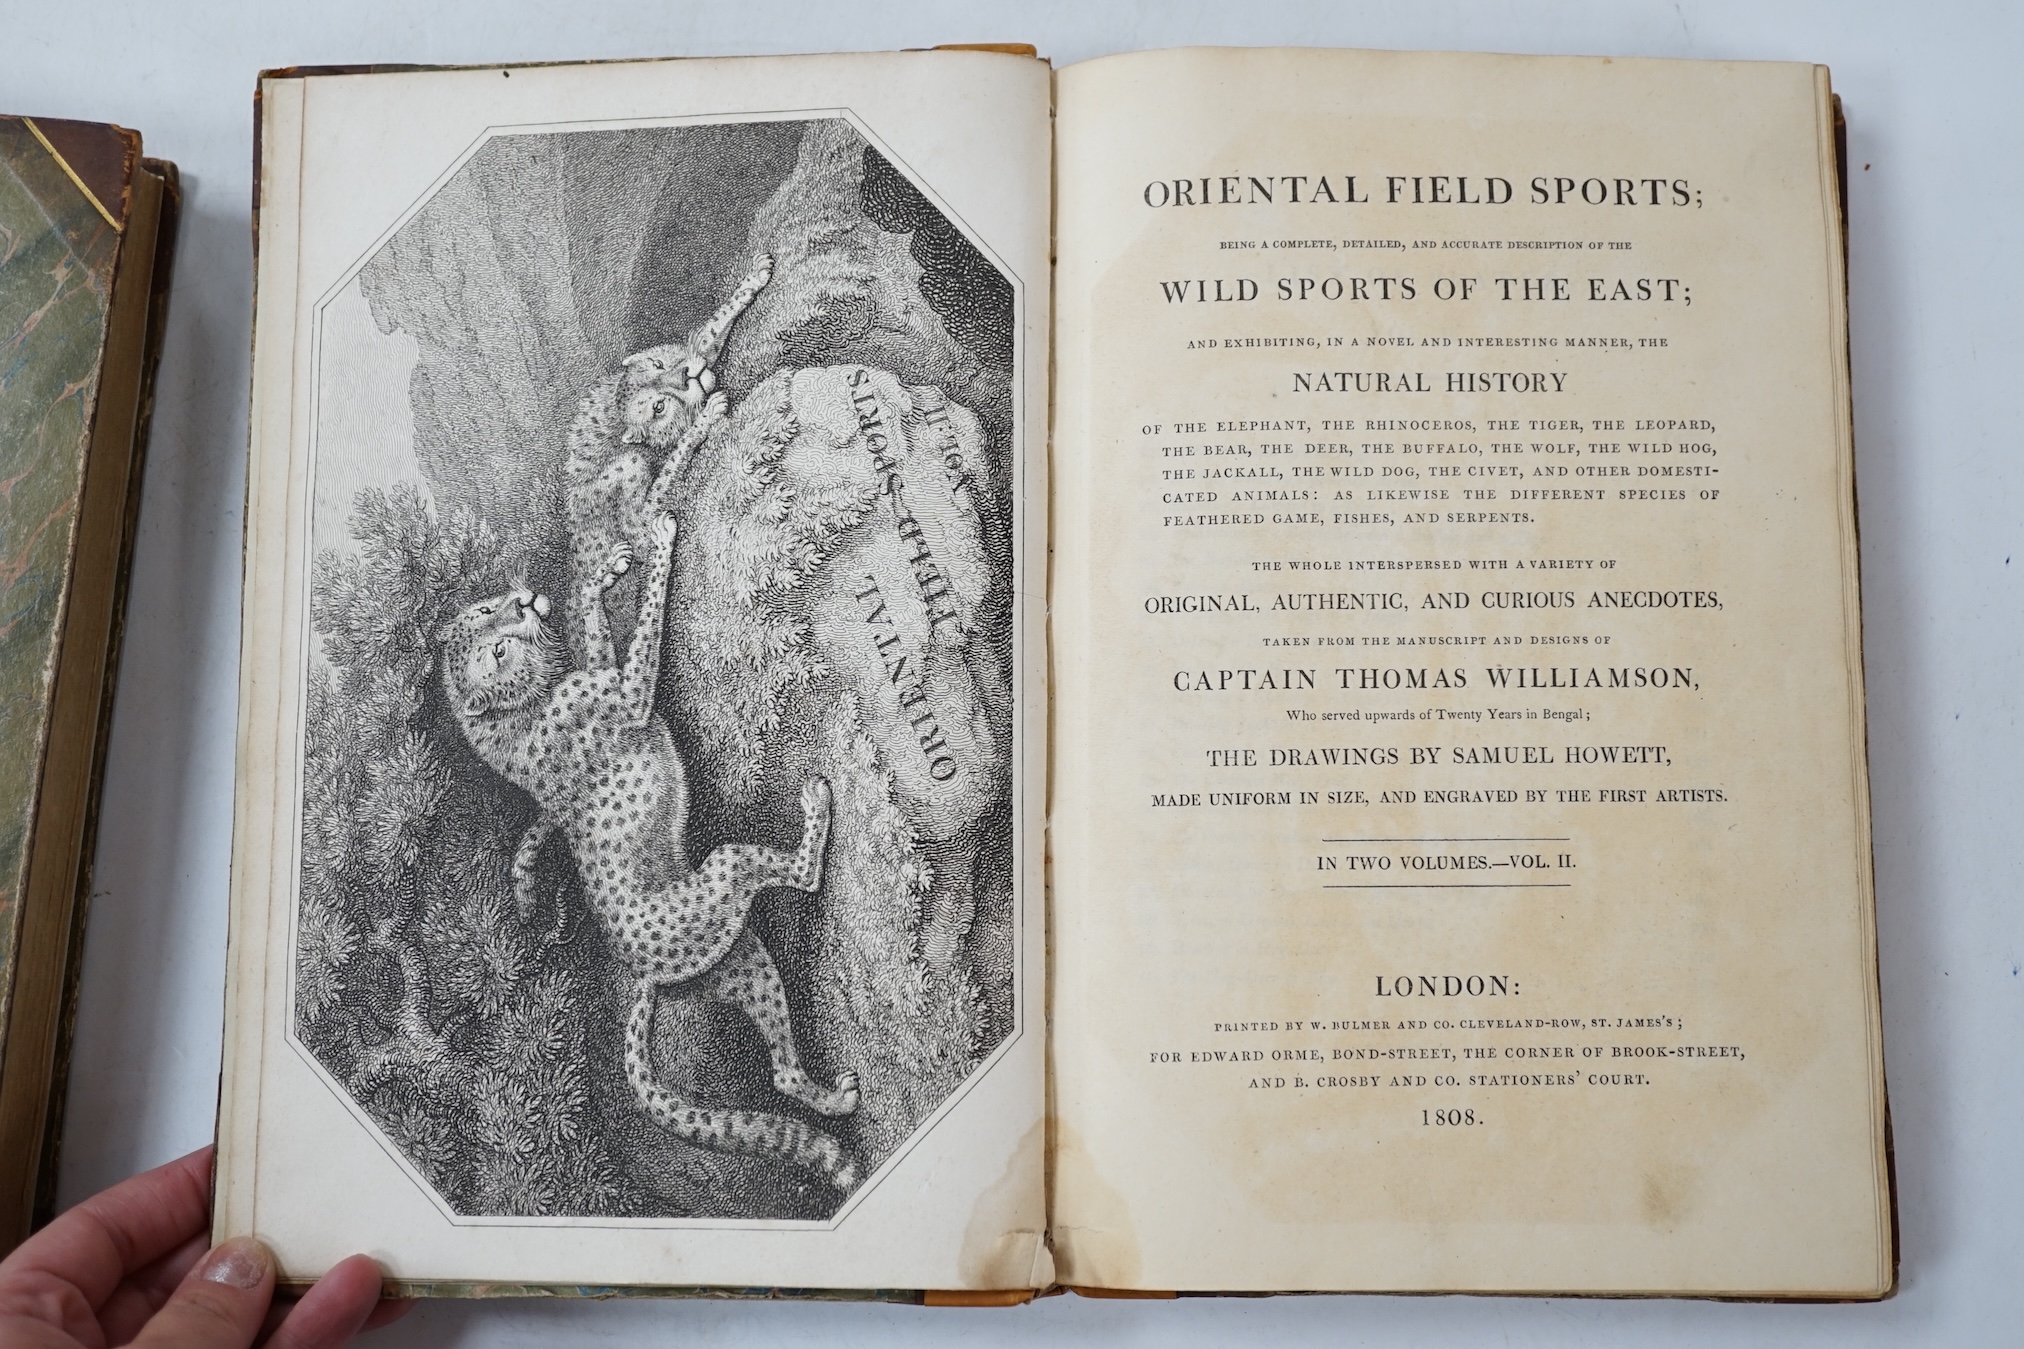 Williamson, Captain Thomas - Oriental Field Sports; Being a complete, detailed, and accurate description of the Wild Sports of the East, 2 vols. additional engraved titles, 40 uncoloured aquatint plates after Samuel Howe